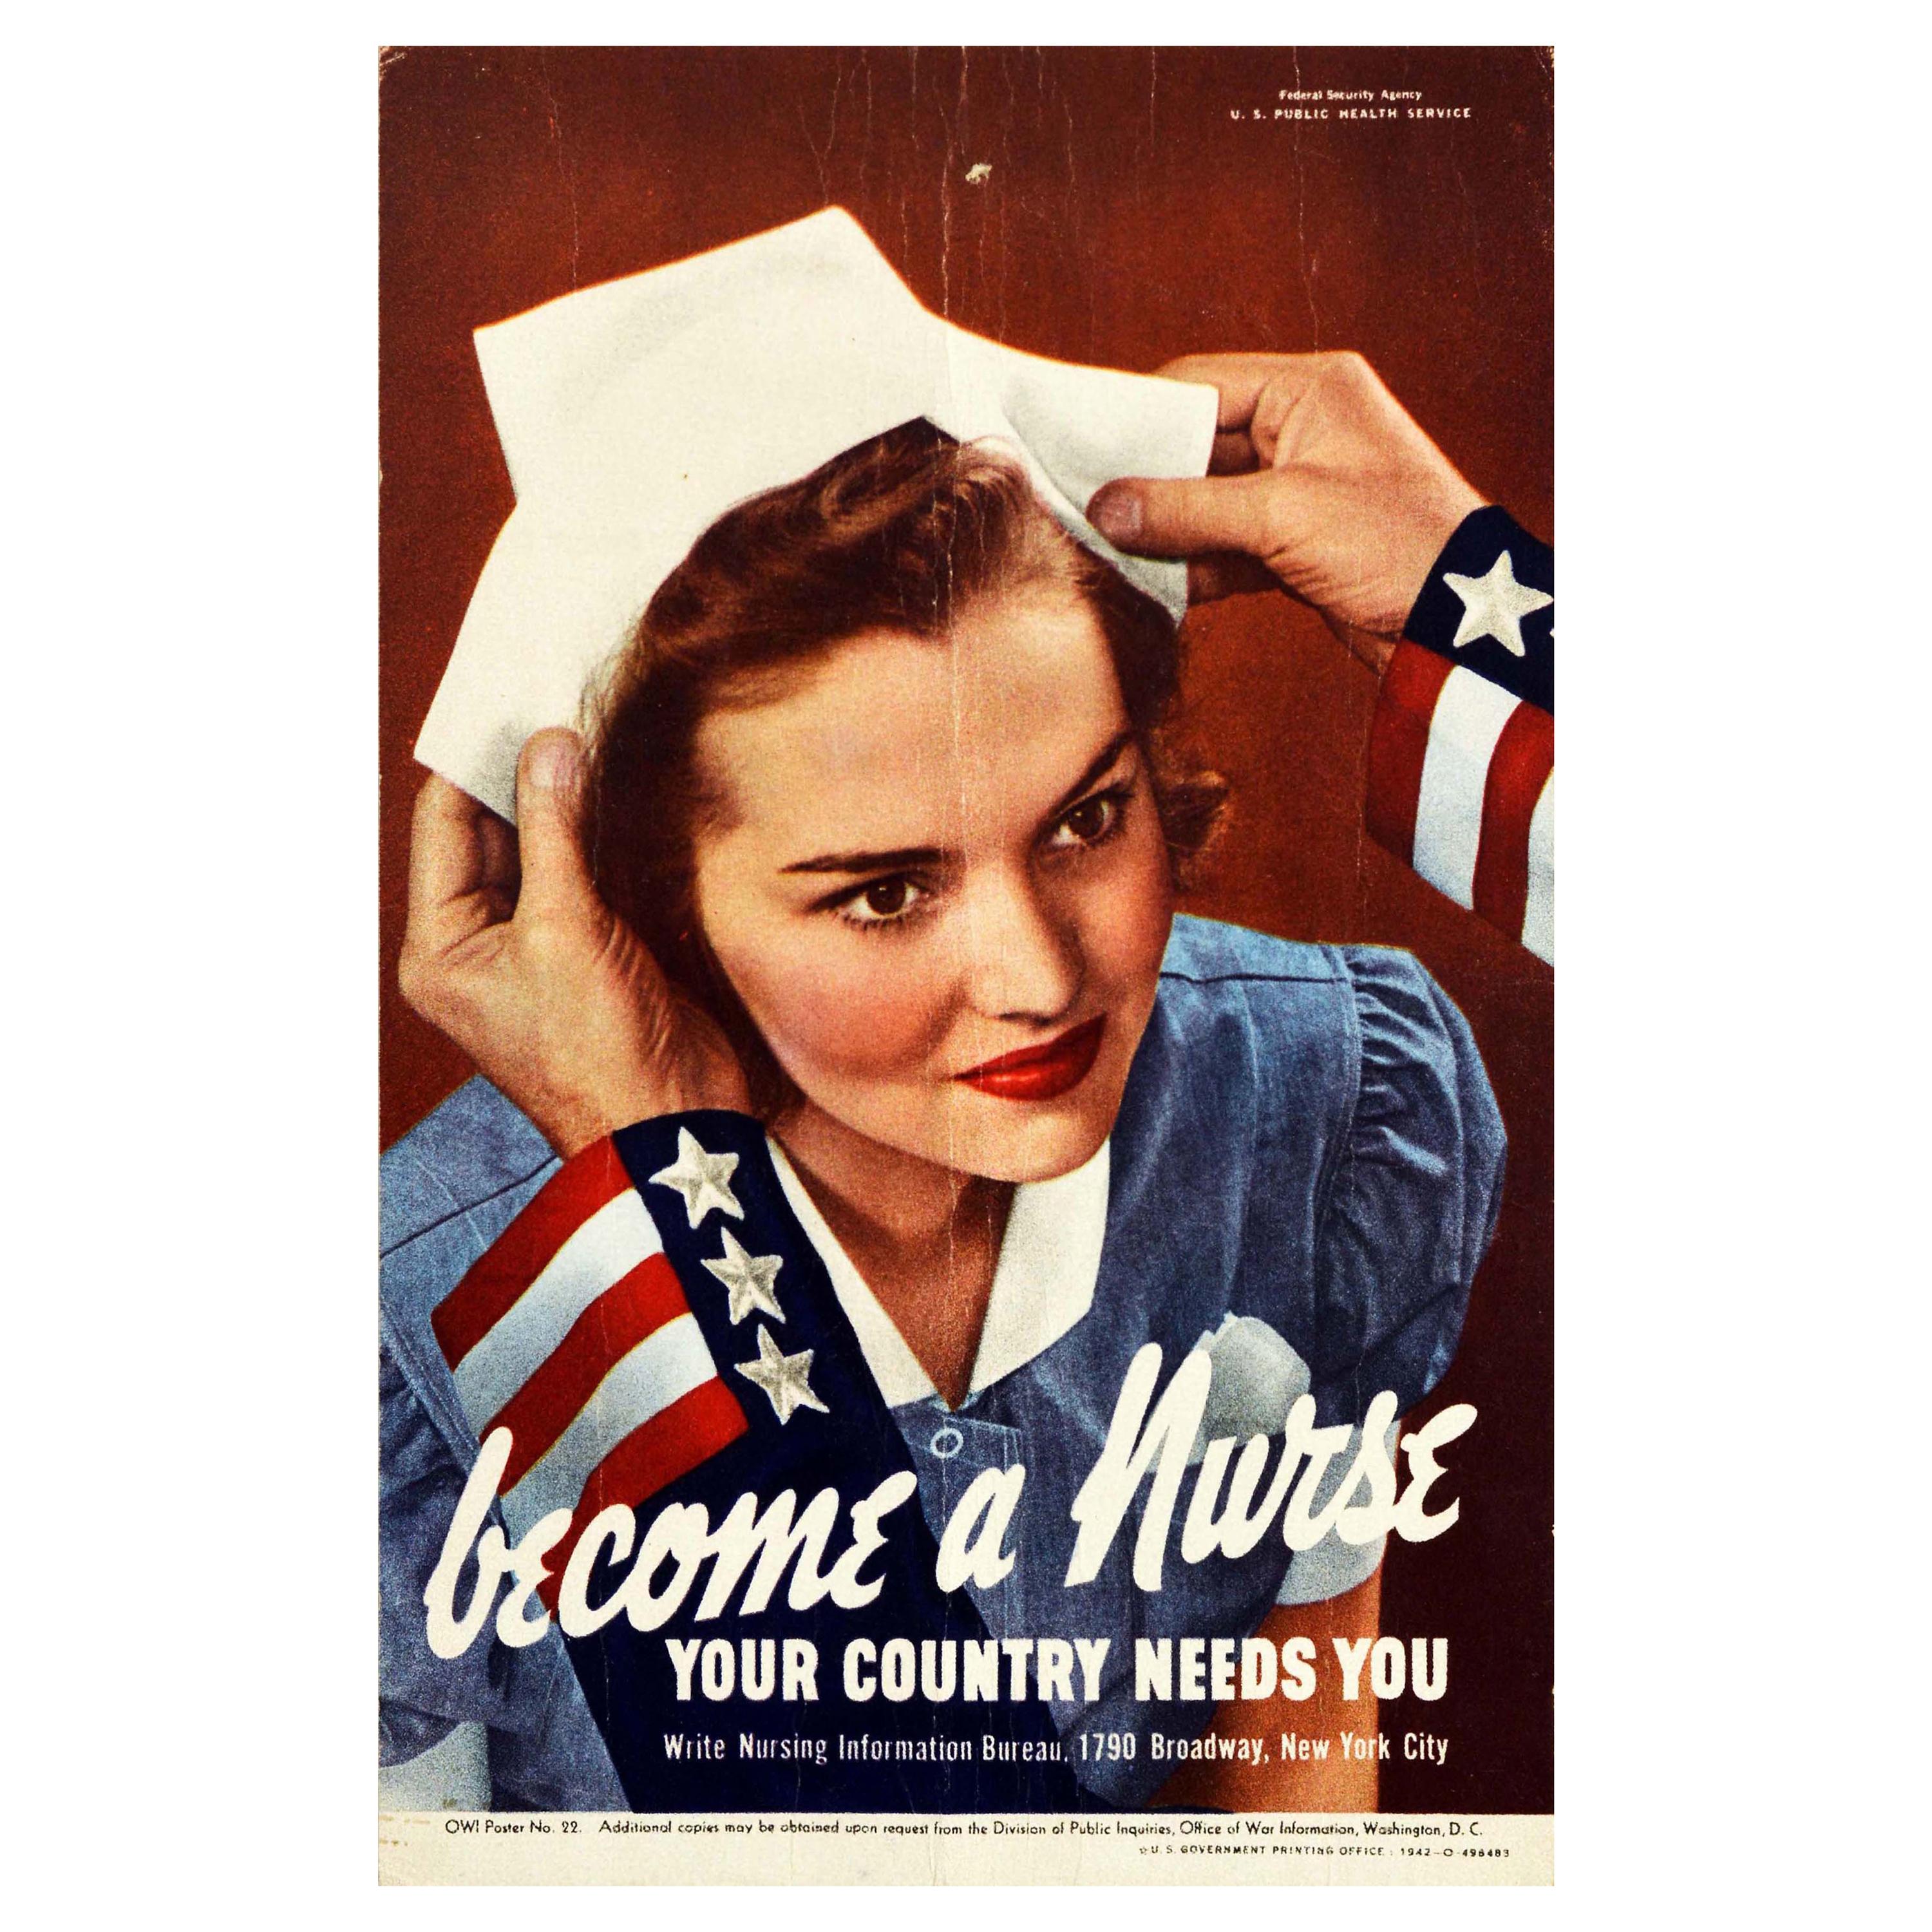 WPA War Propaganda Become A Nurse Your Country Needs You WWII Patriotism Motivational Framed Poster 14x20 inch Poster Foundry 180638 